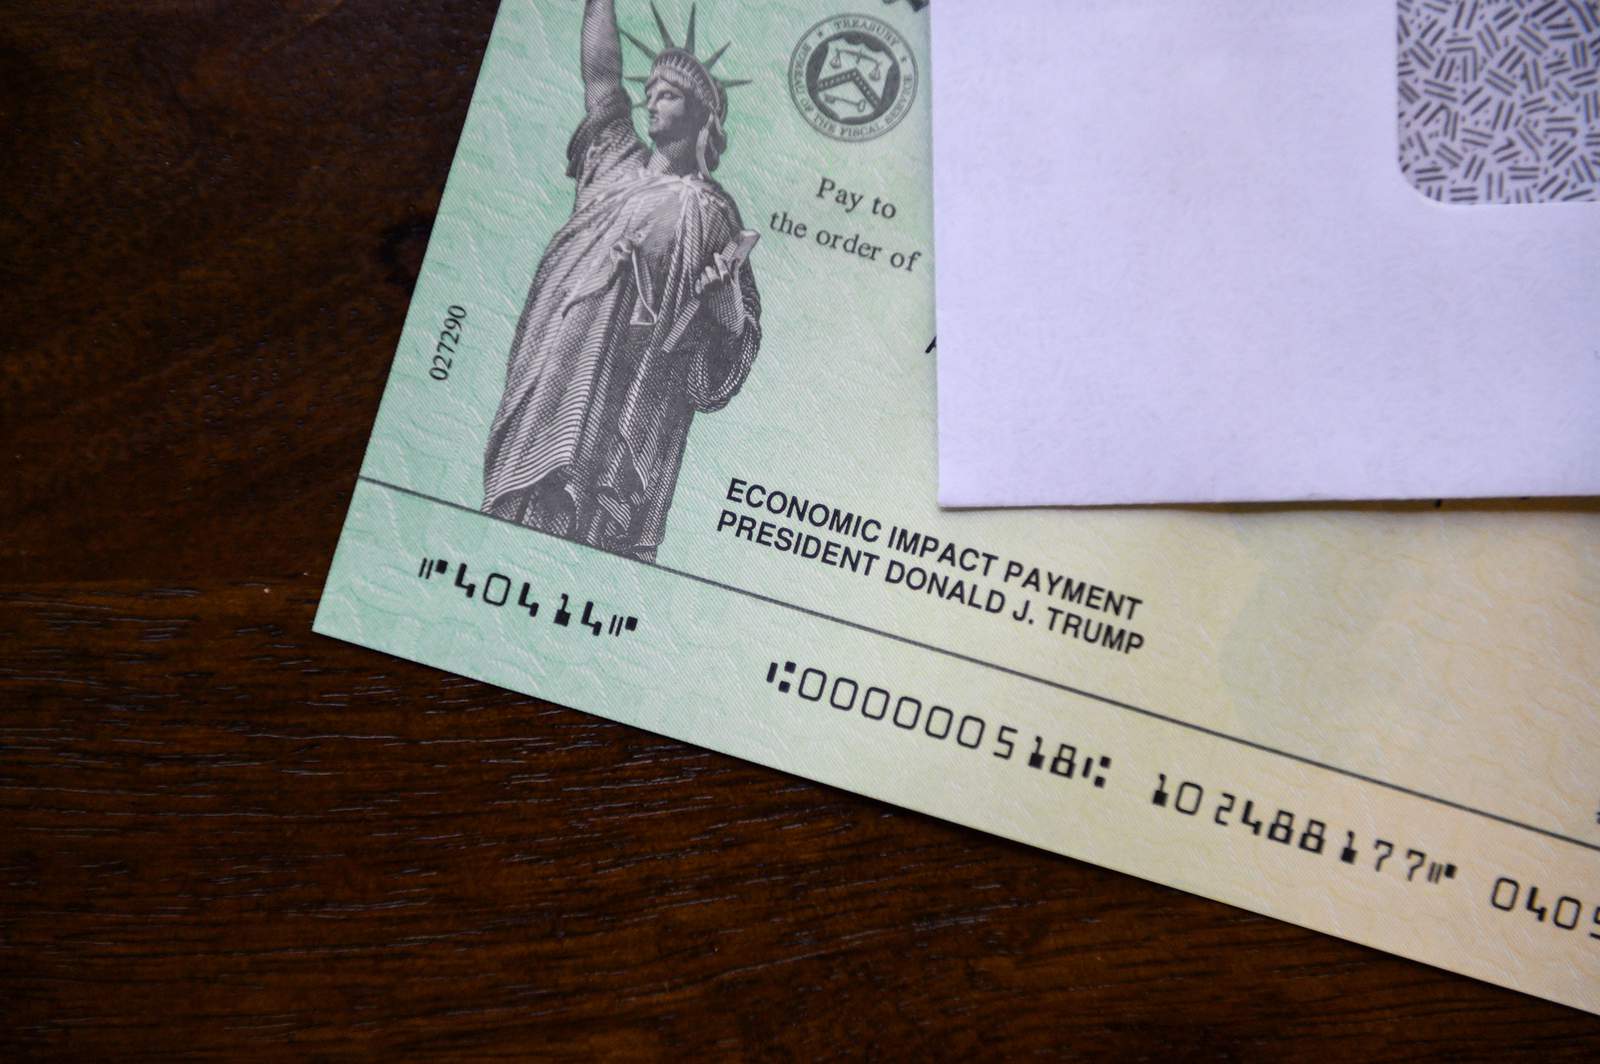 Second stimulus payments of $600 are officially on the way for most Americans, government says